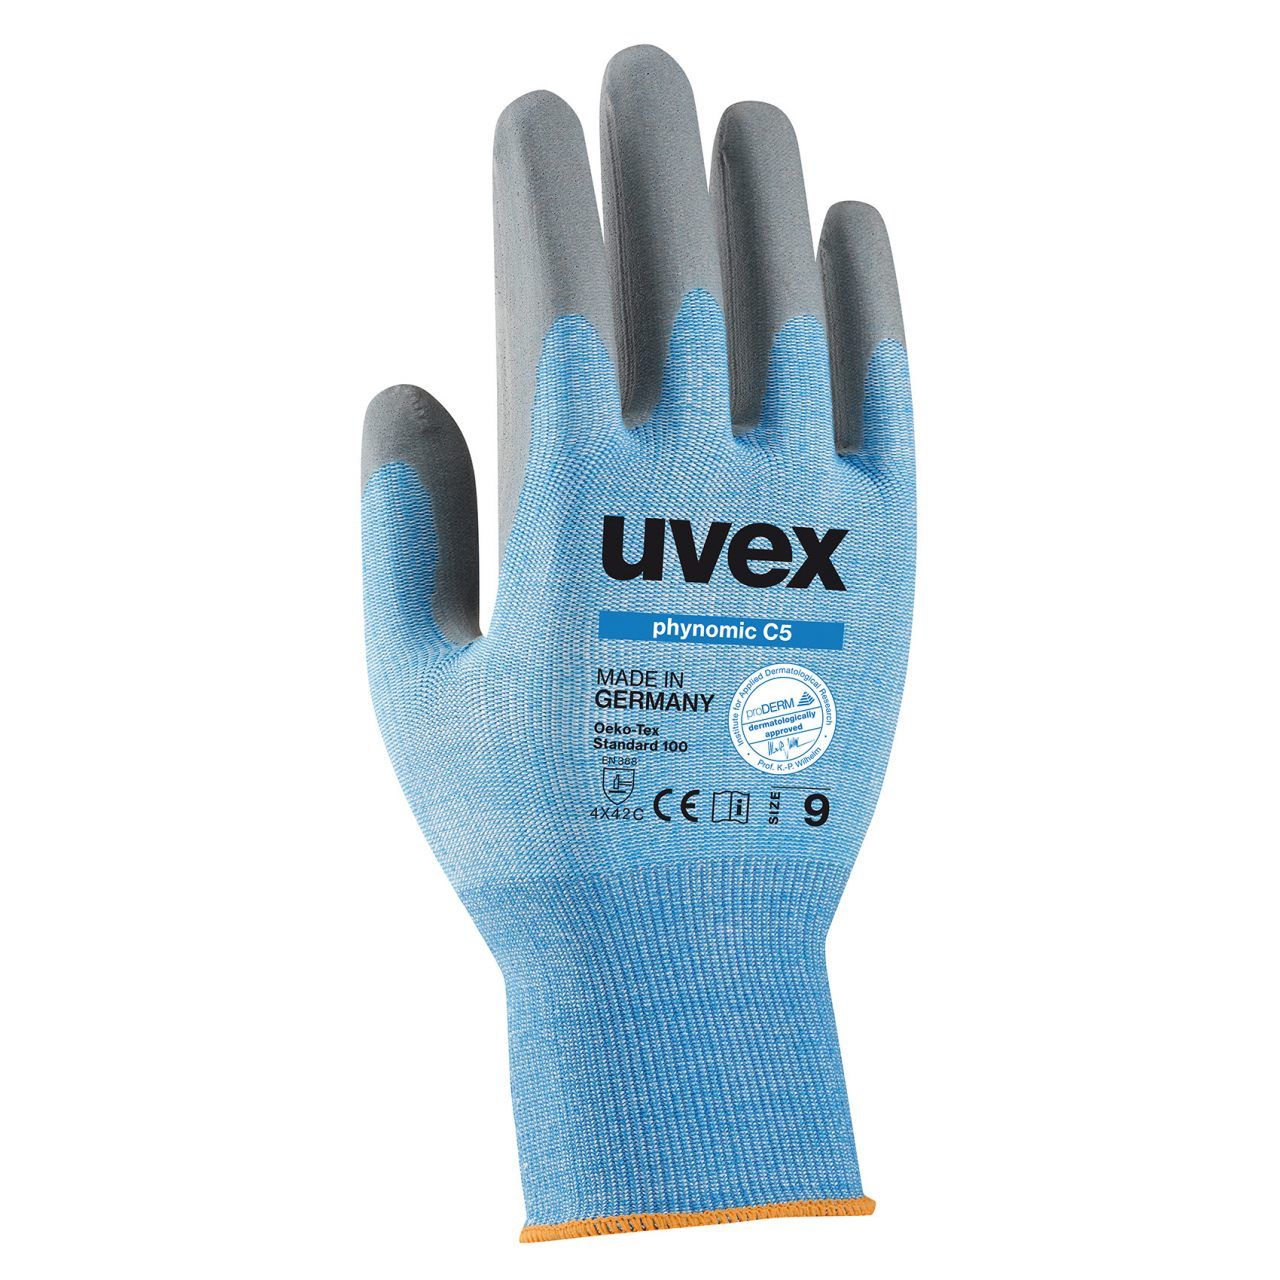 uvex phynomic C5 Safety Cut Gloves - Small (7)